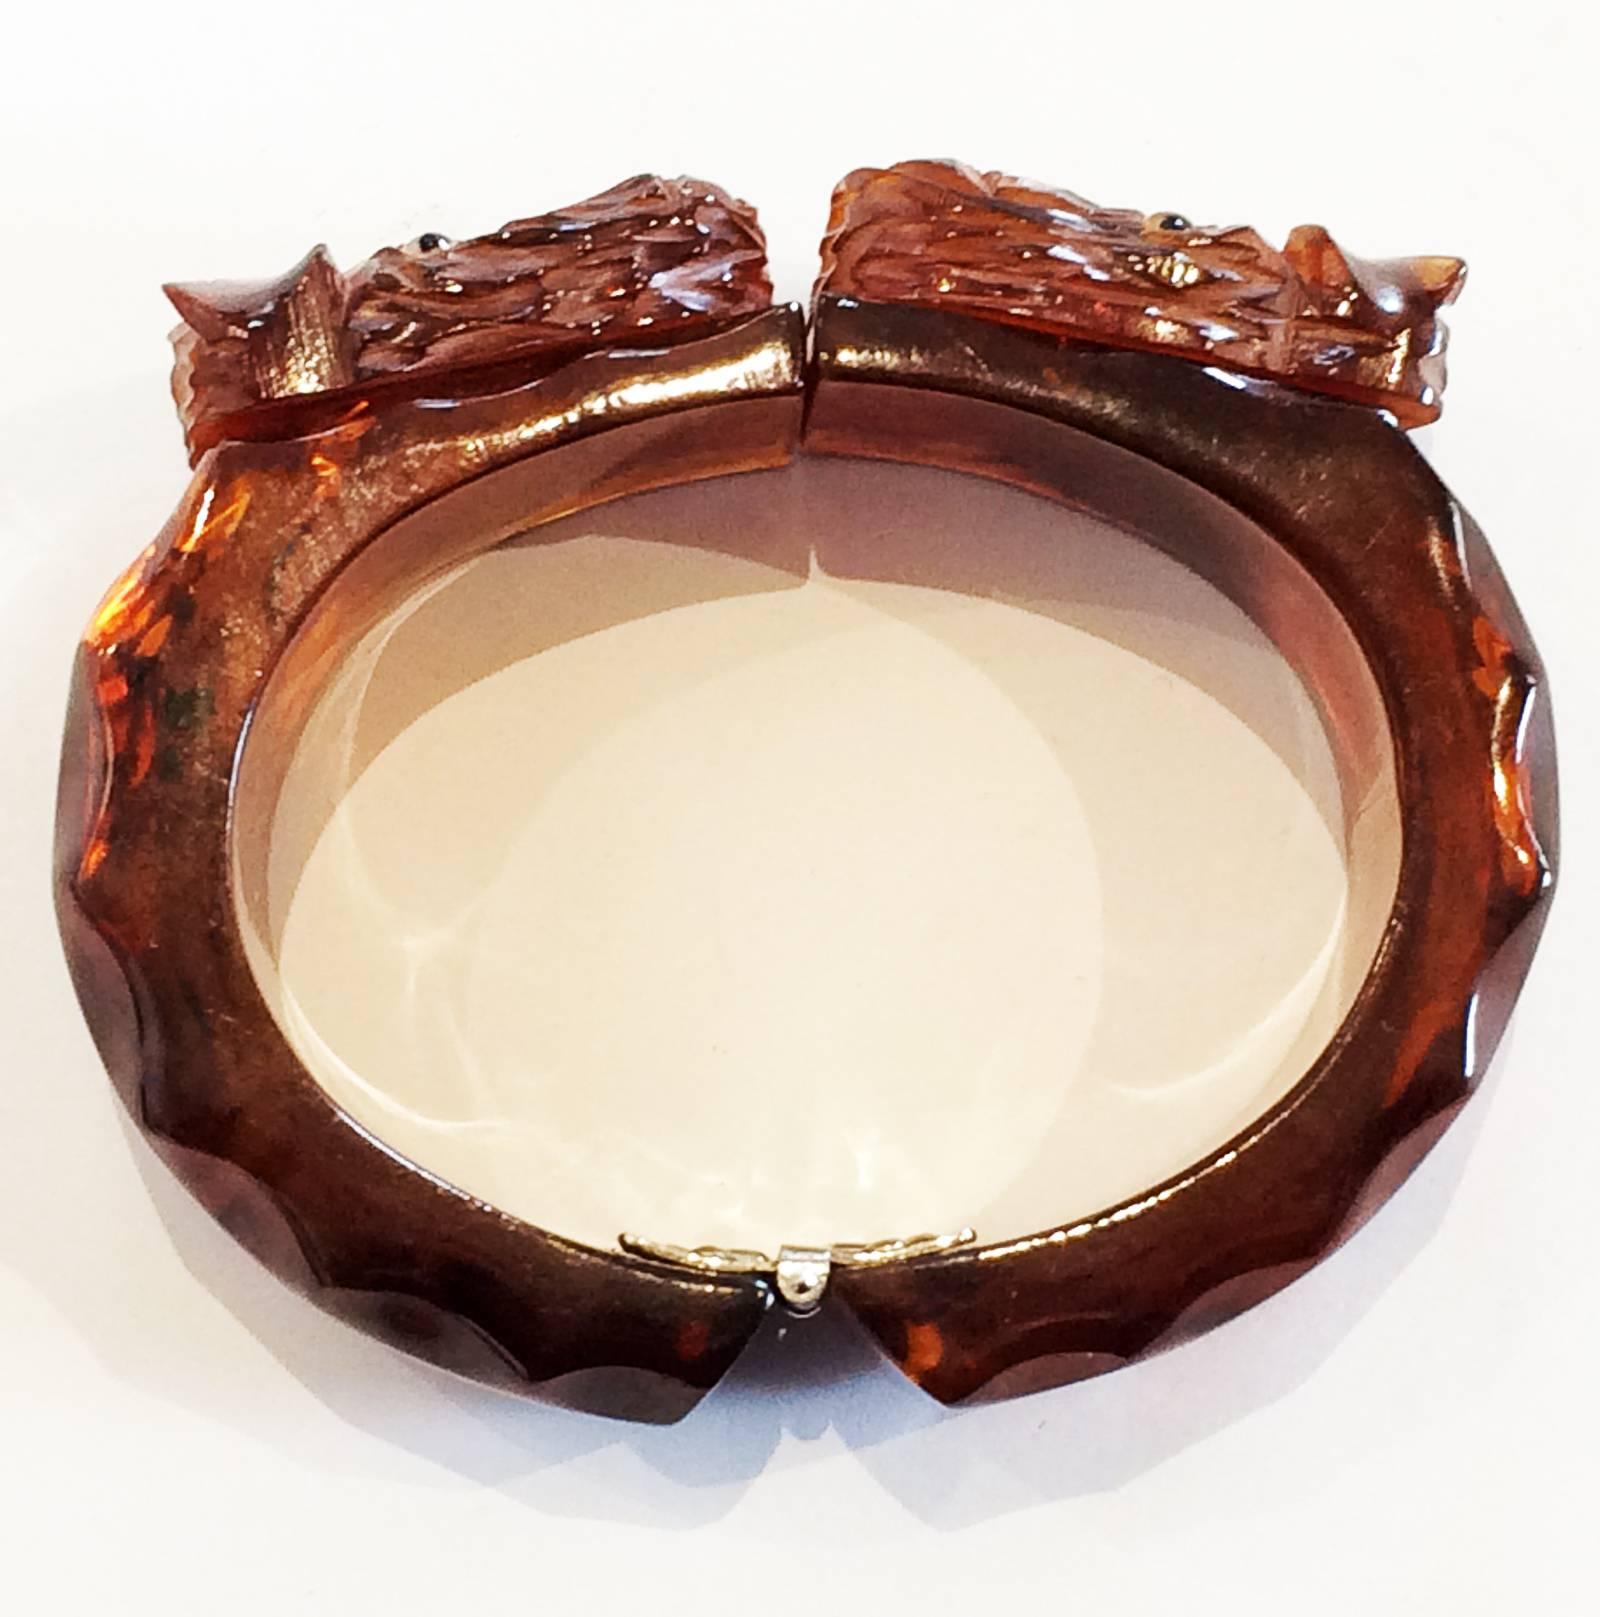 Art Deco Swirled Honey coloured Bakelite Clamper Bangle, with very detailed, carved Scottie Dogs at front, set with tiny glass eyes, and scalloped edges to the bands. The face of the Scotties is amazing and capture the dog perfectly. Condition is